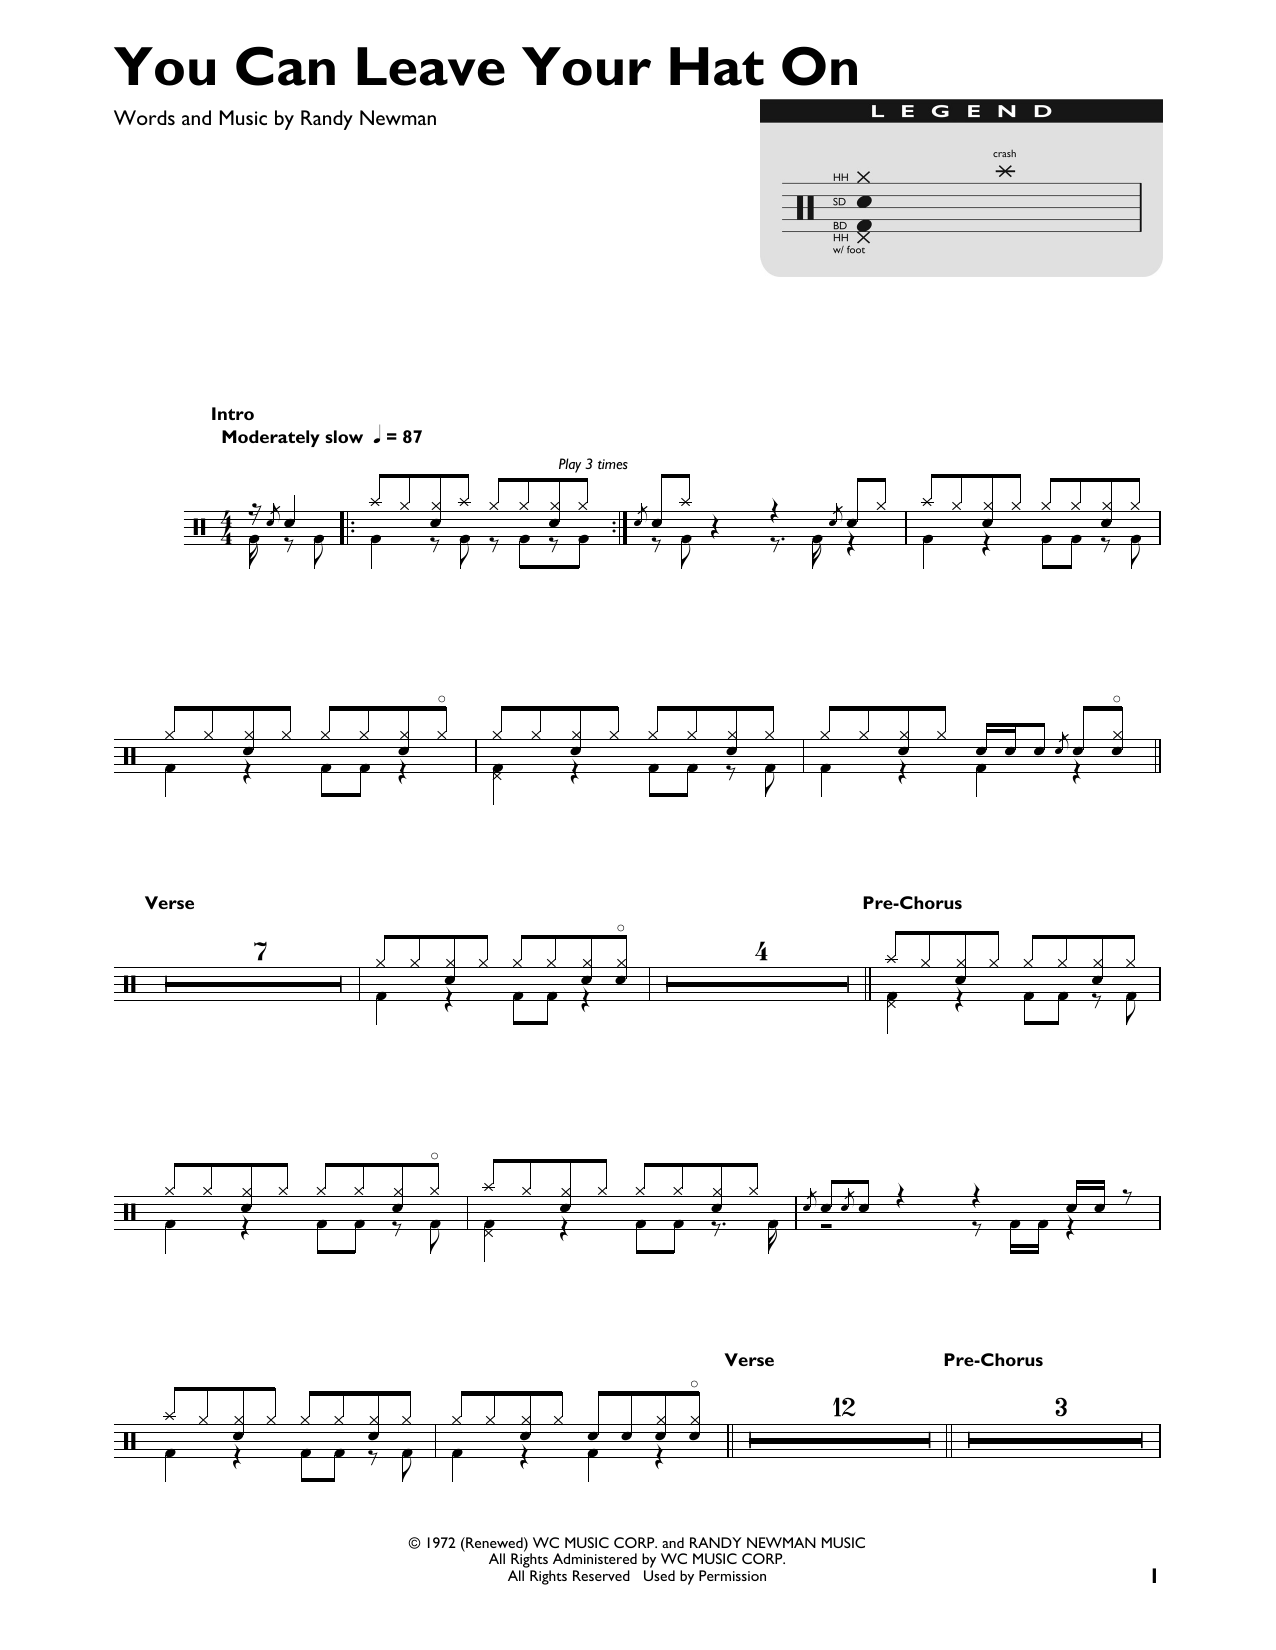 Download Joe Cocker You Can Leave Your Hat On Sheet Music